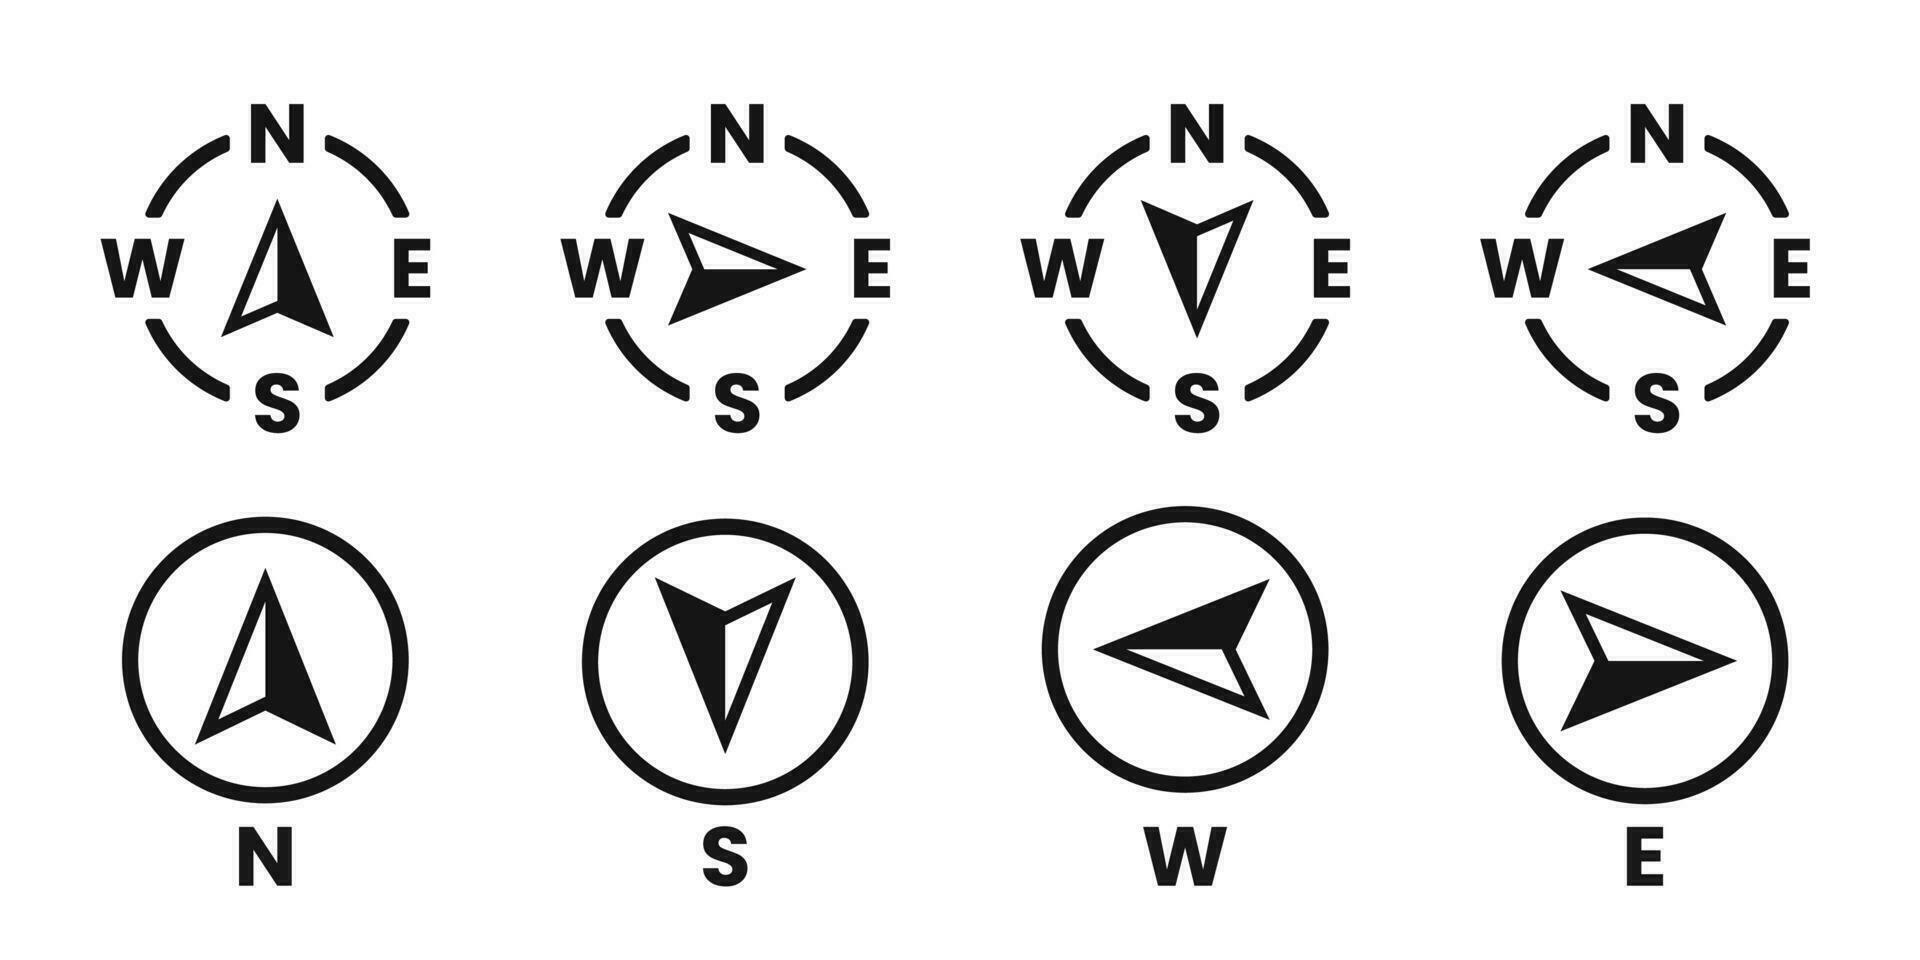 Vector compass icons of north, south, east, and west direction. Map symbol. Arrow icon.